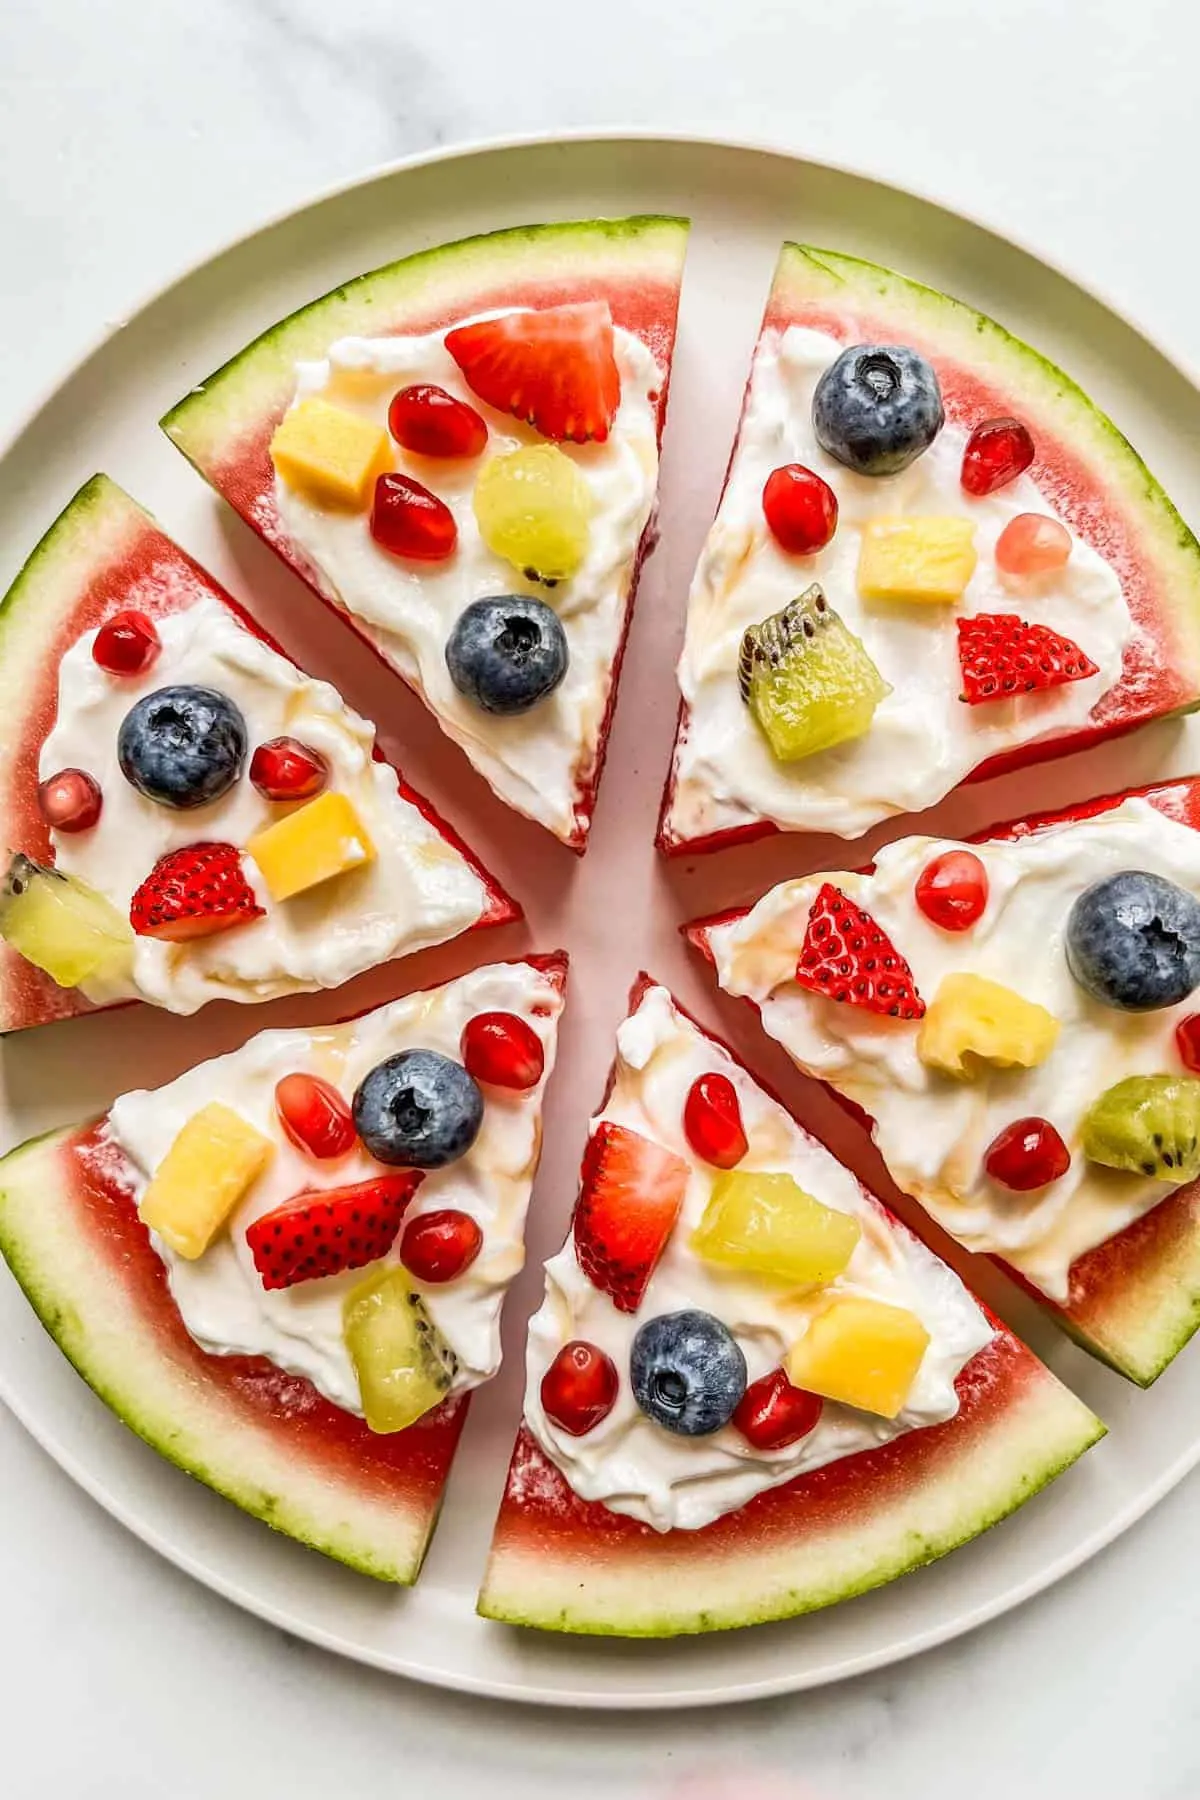 Watermelon spices topped with yogurt and fruit pieces like a pizza